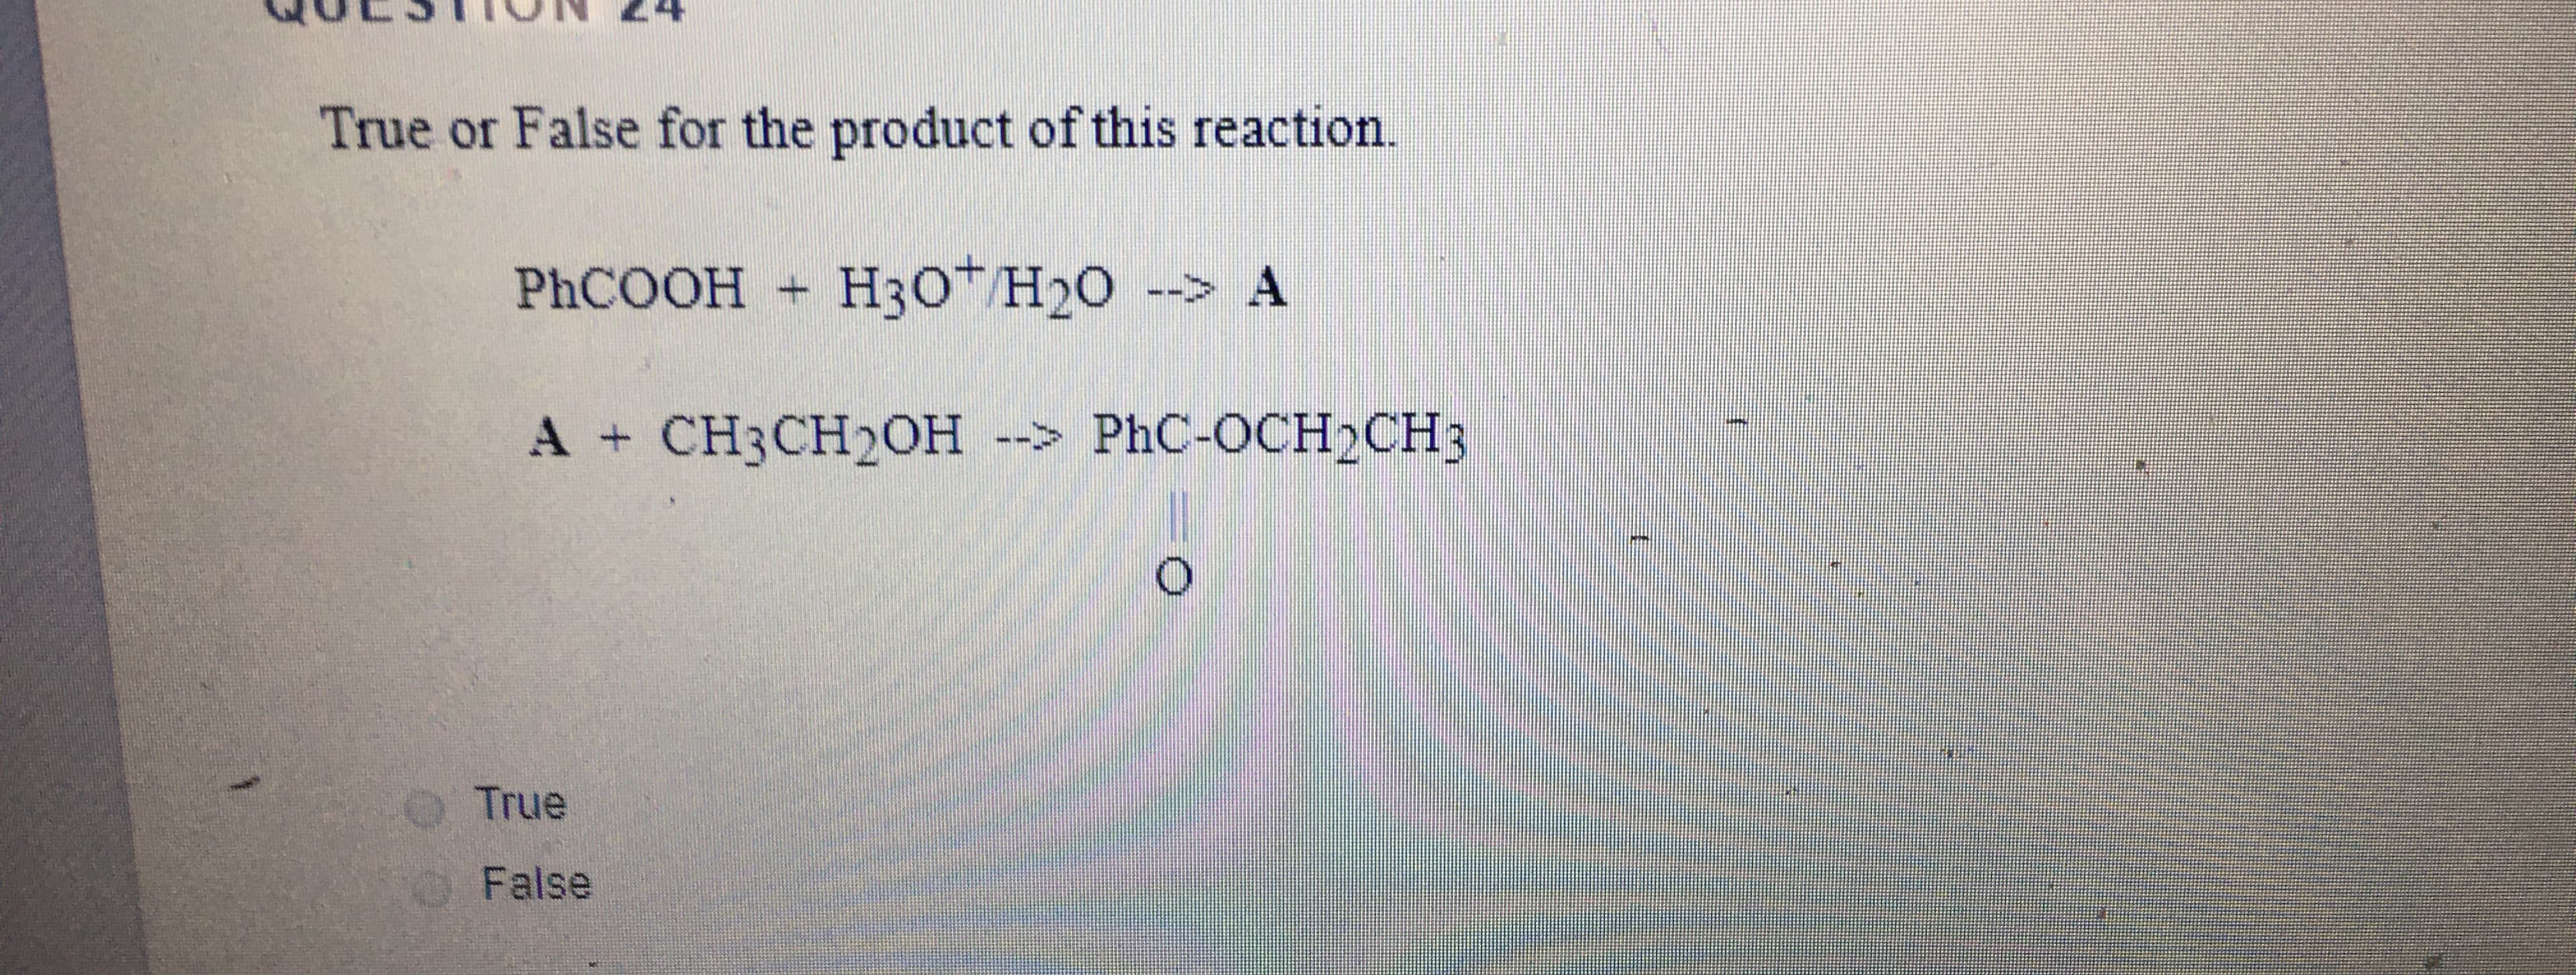 True or False for the product of this reaction.
PHCOOH H3OT H20 --> A
A + CH3CH20H --> PhC-OCH2CH3
True
O False
